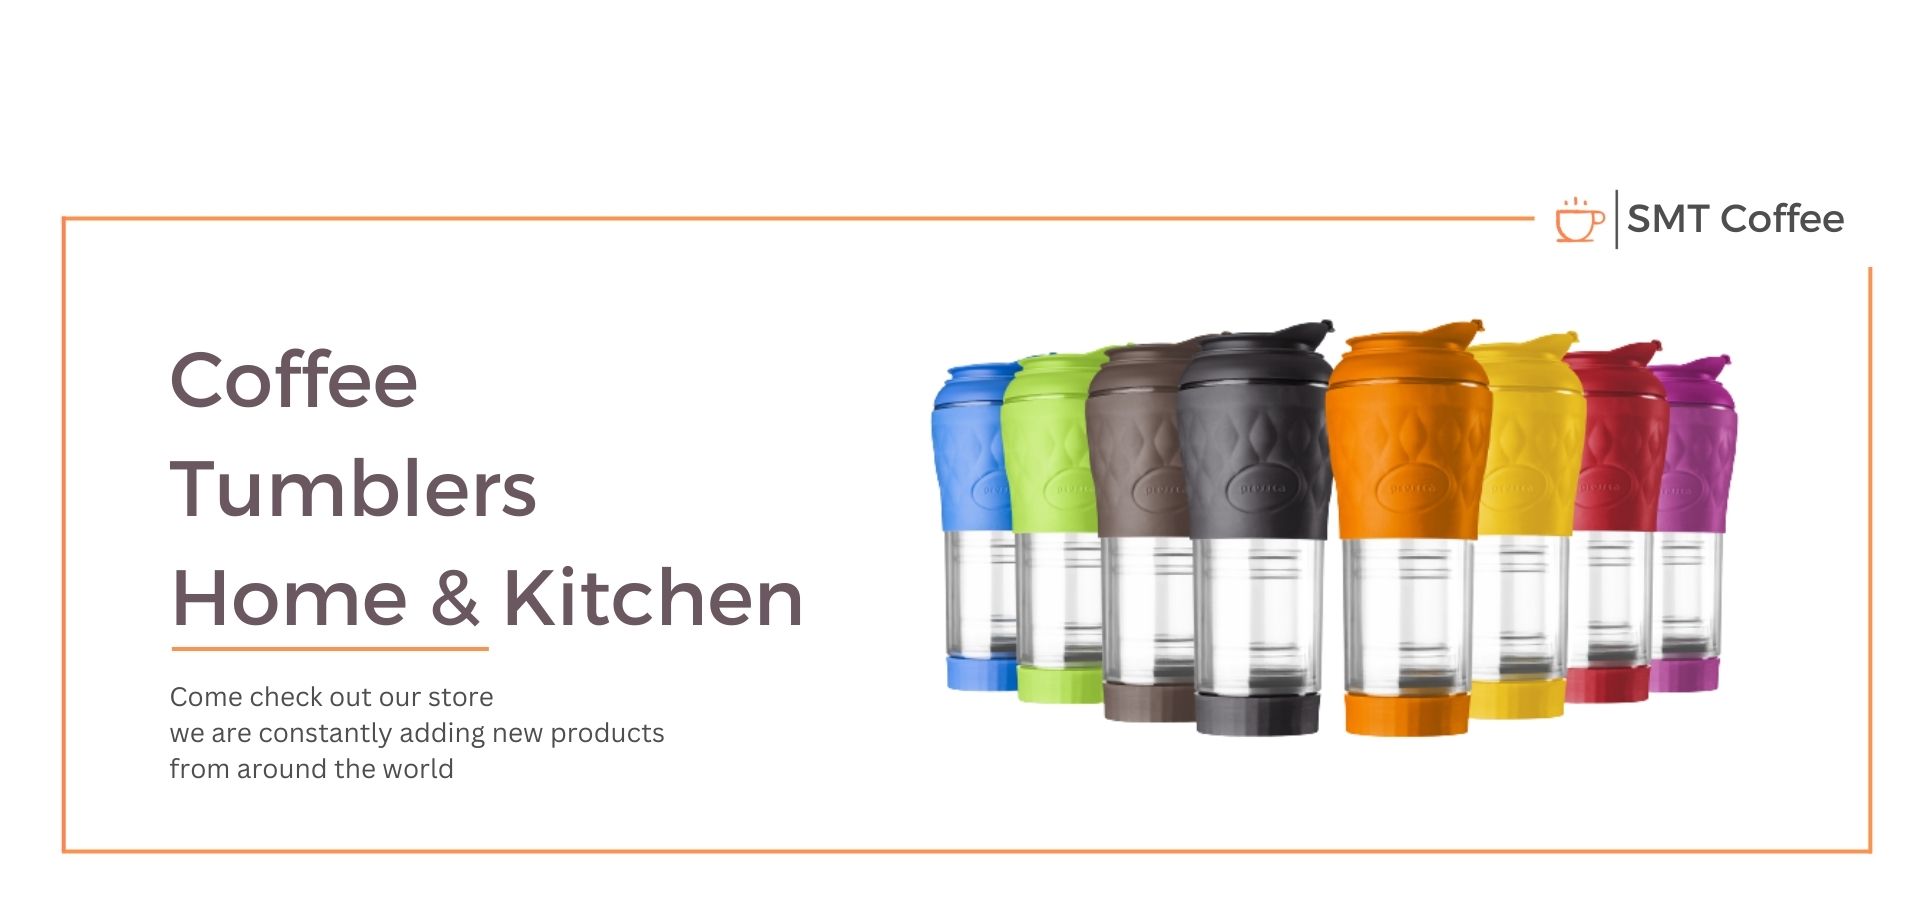 Coffee Tumblers Home & Kitchen. Come check out our store  we are constantly adding new products from around the world. Free shipping.  Best quality smtcoffee pressca